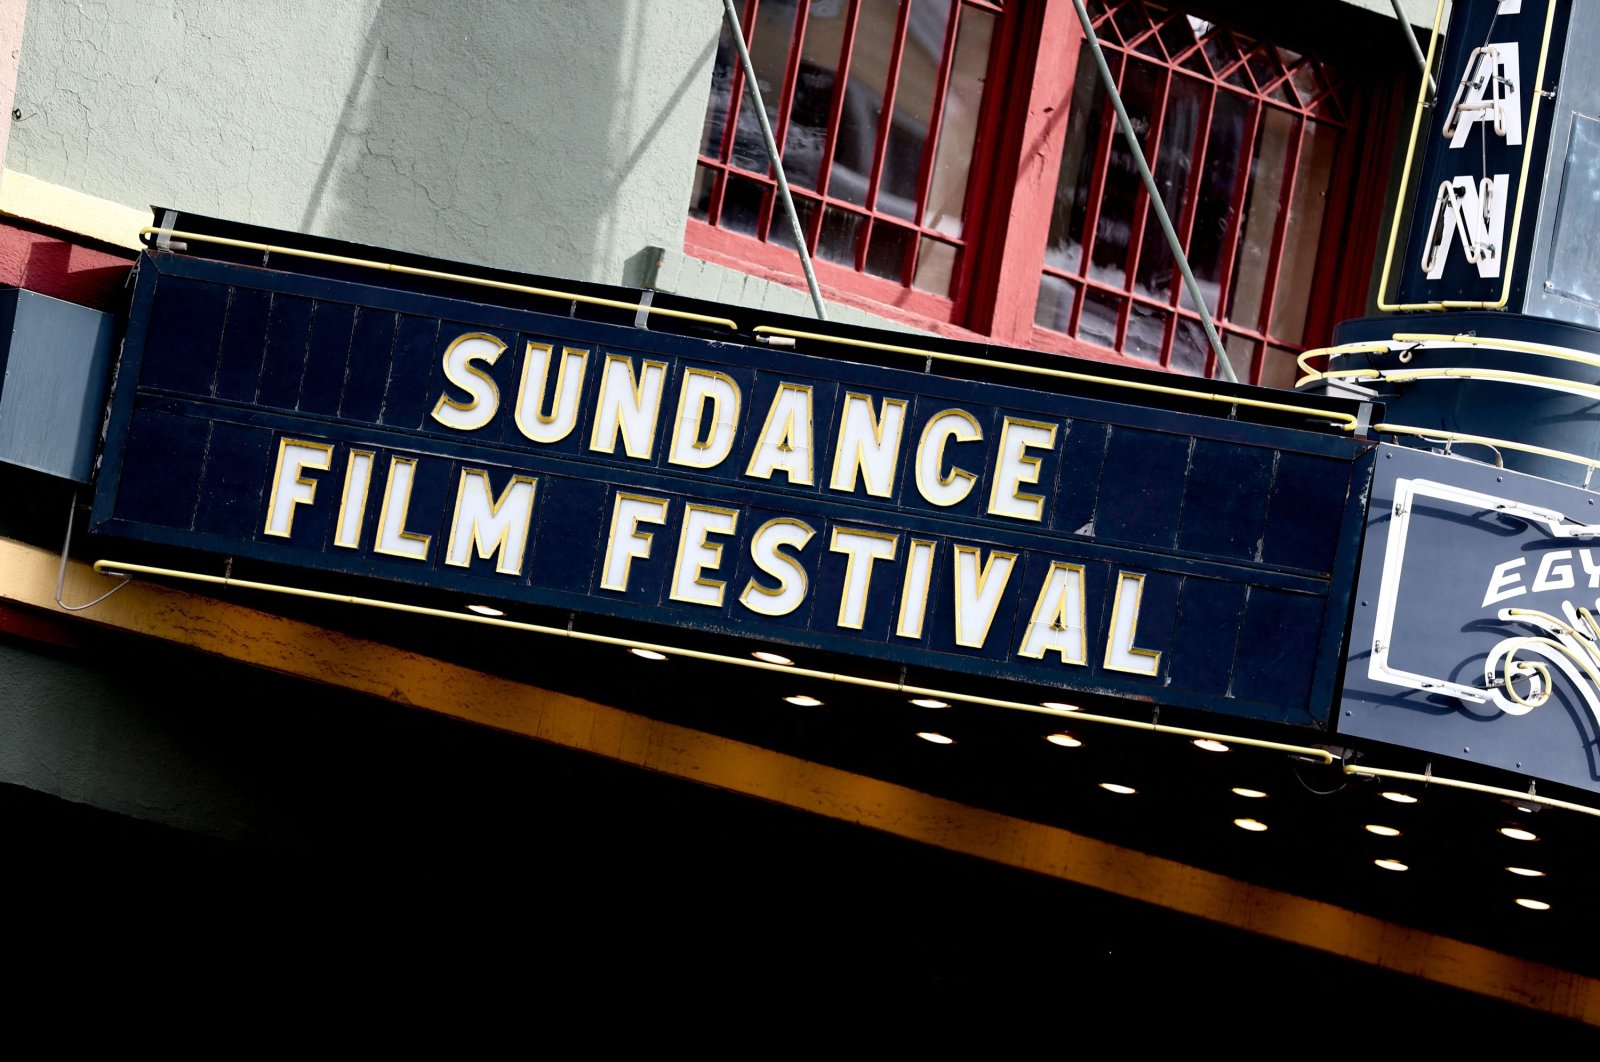 The Egyptian Theater marquee on Main Street is seen during the 2019 Sundance Film Festival in Park City, Utah, U.S., Jan. 25, 2019. (AFP)